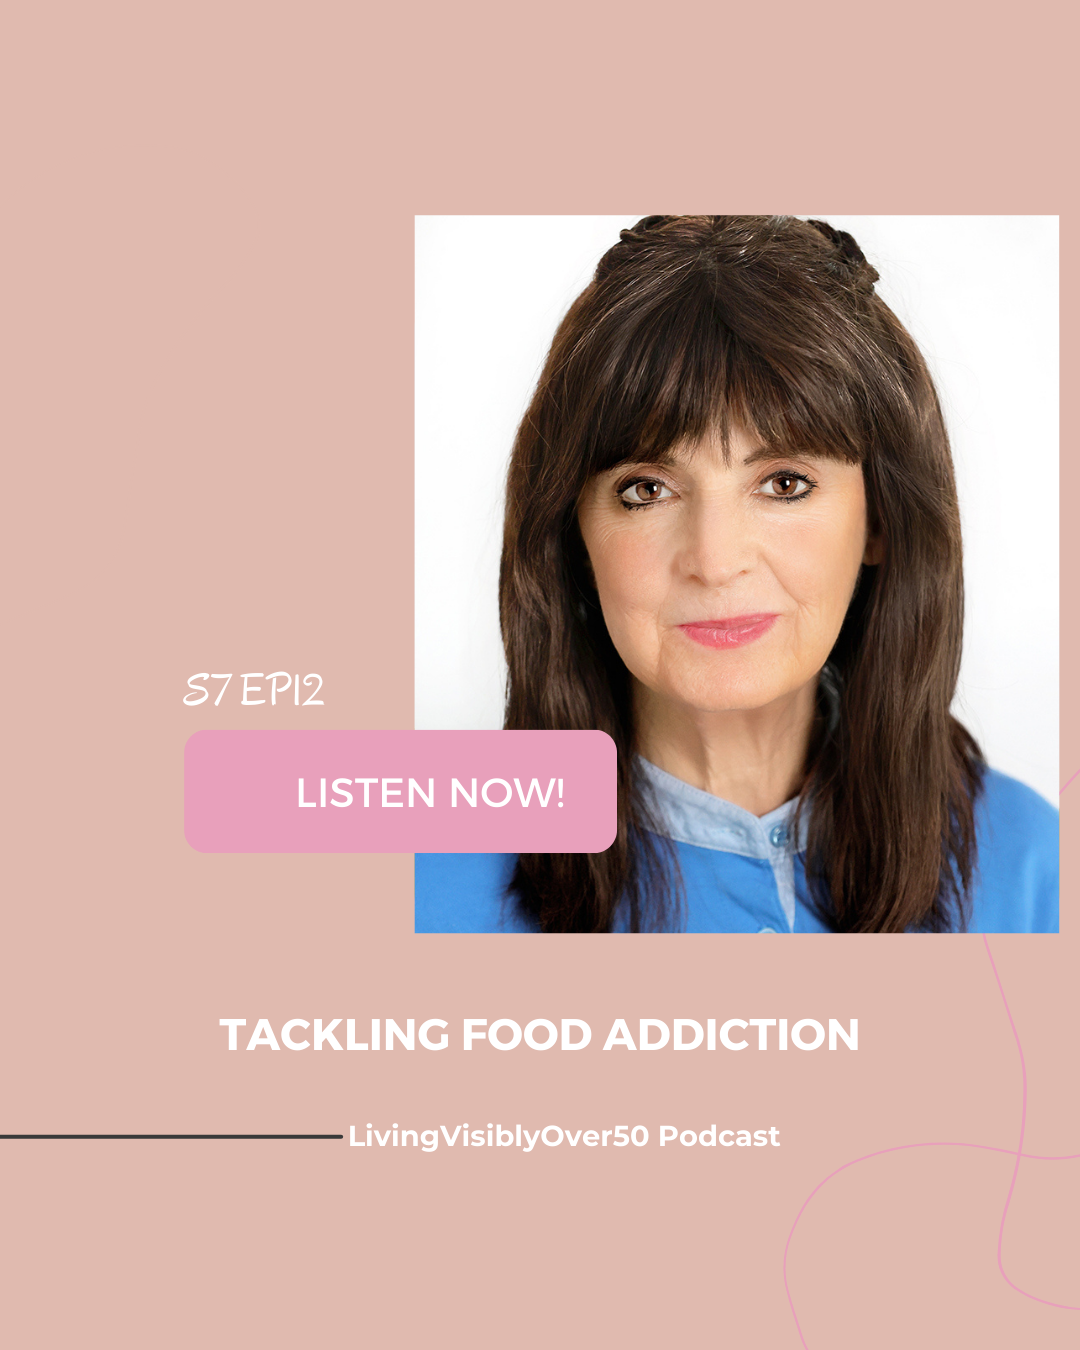 Living Visibly Over 50 podcast.  Tackling Food Addiction.